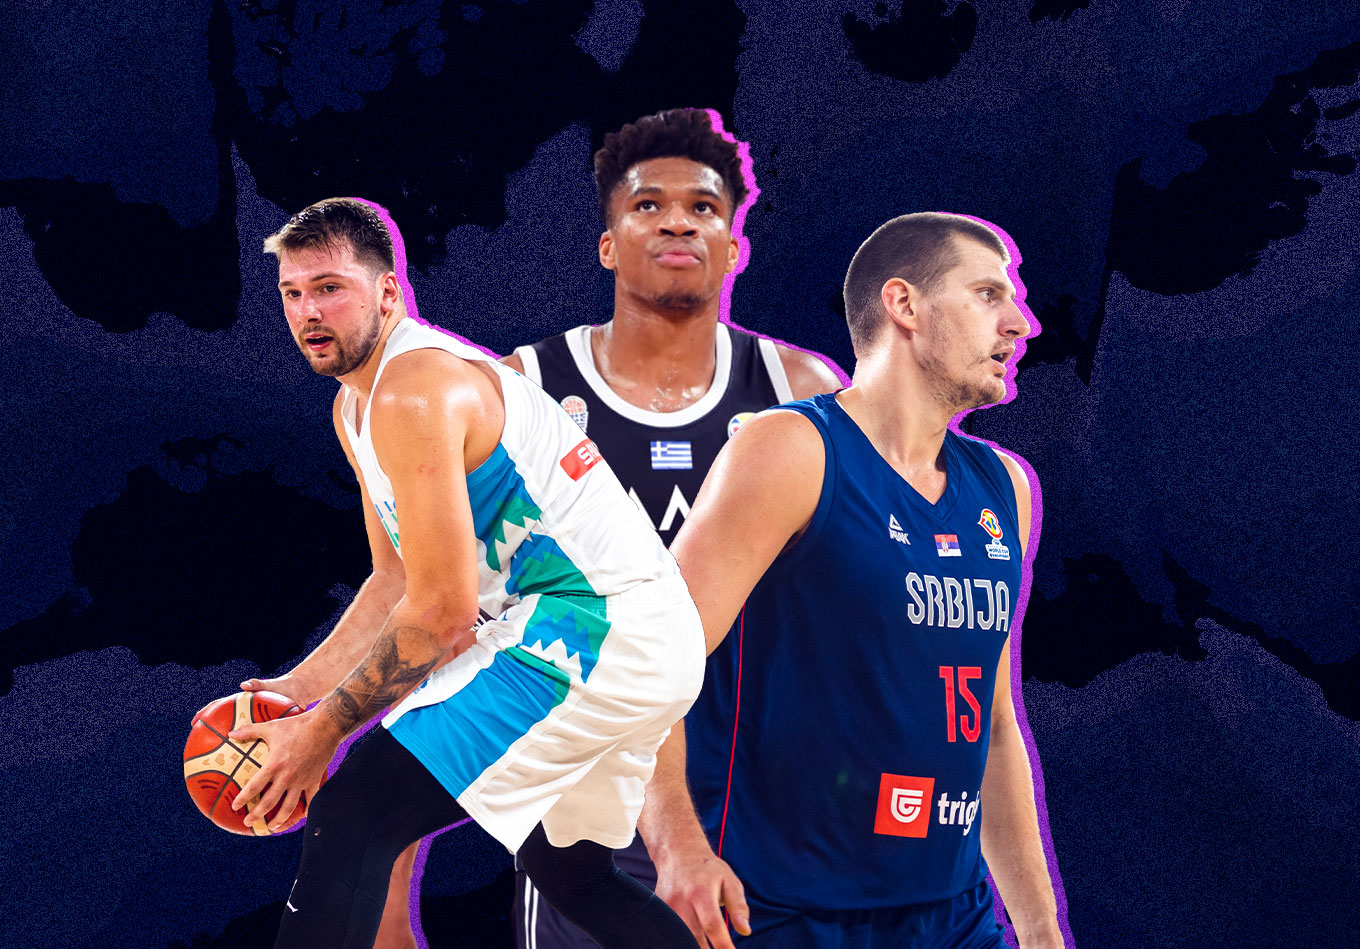 The EuroBasket 2022 Players to Watch